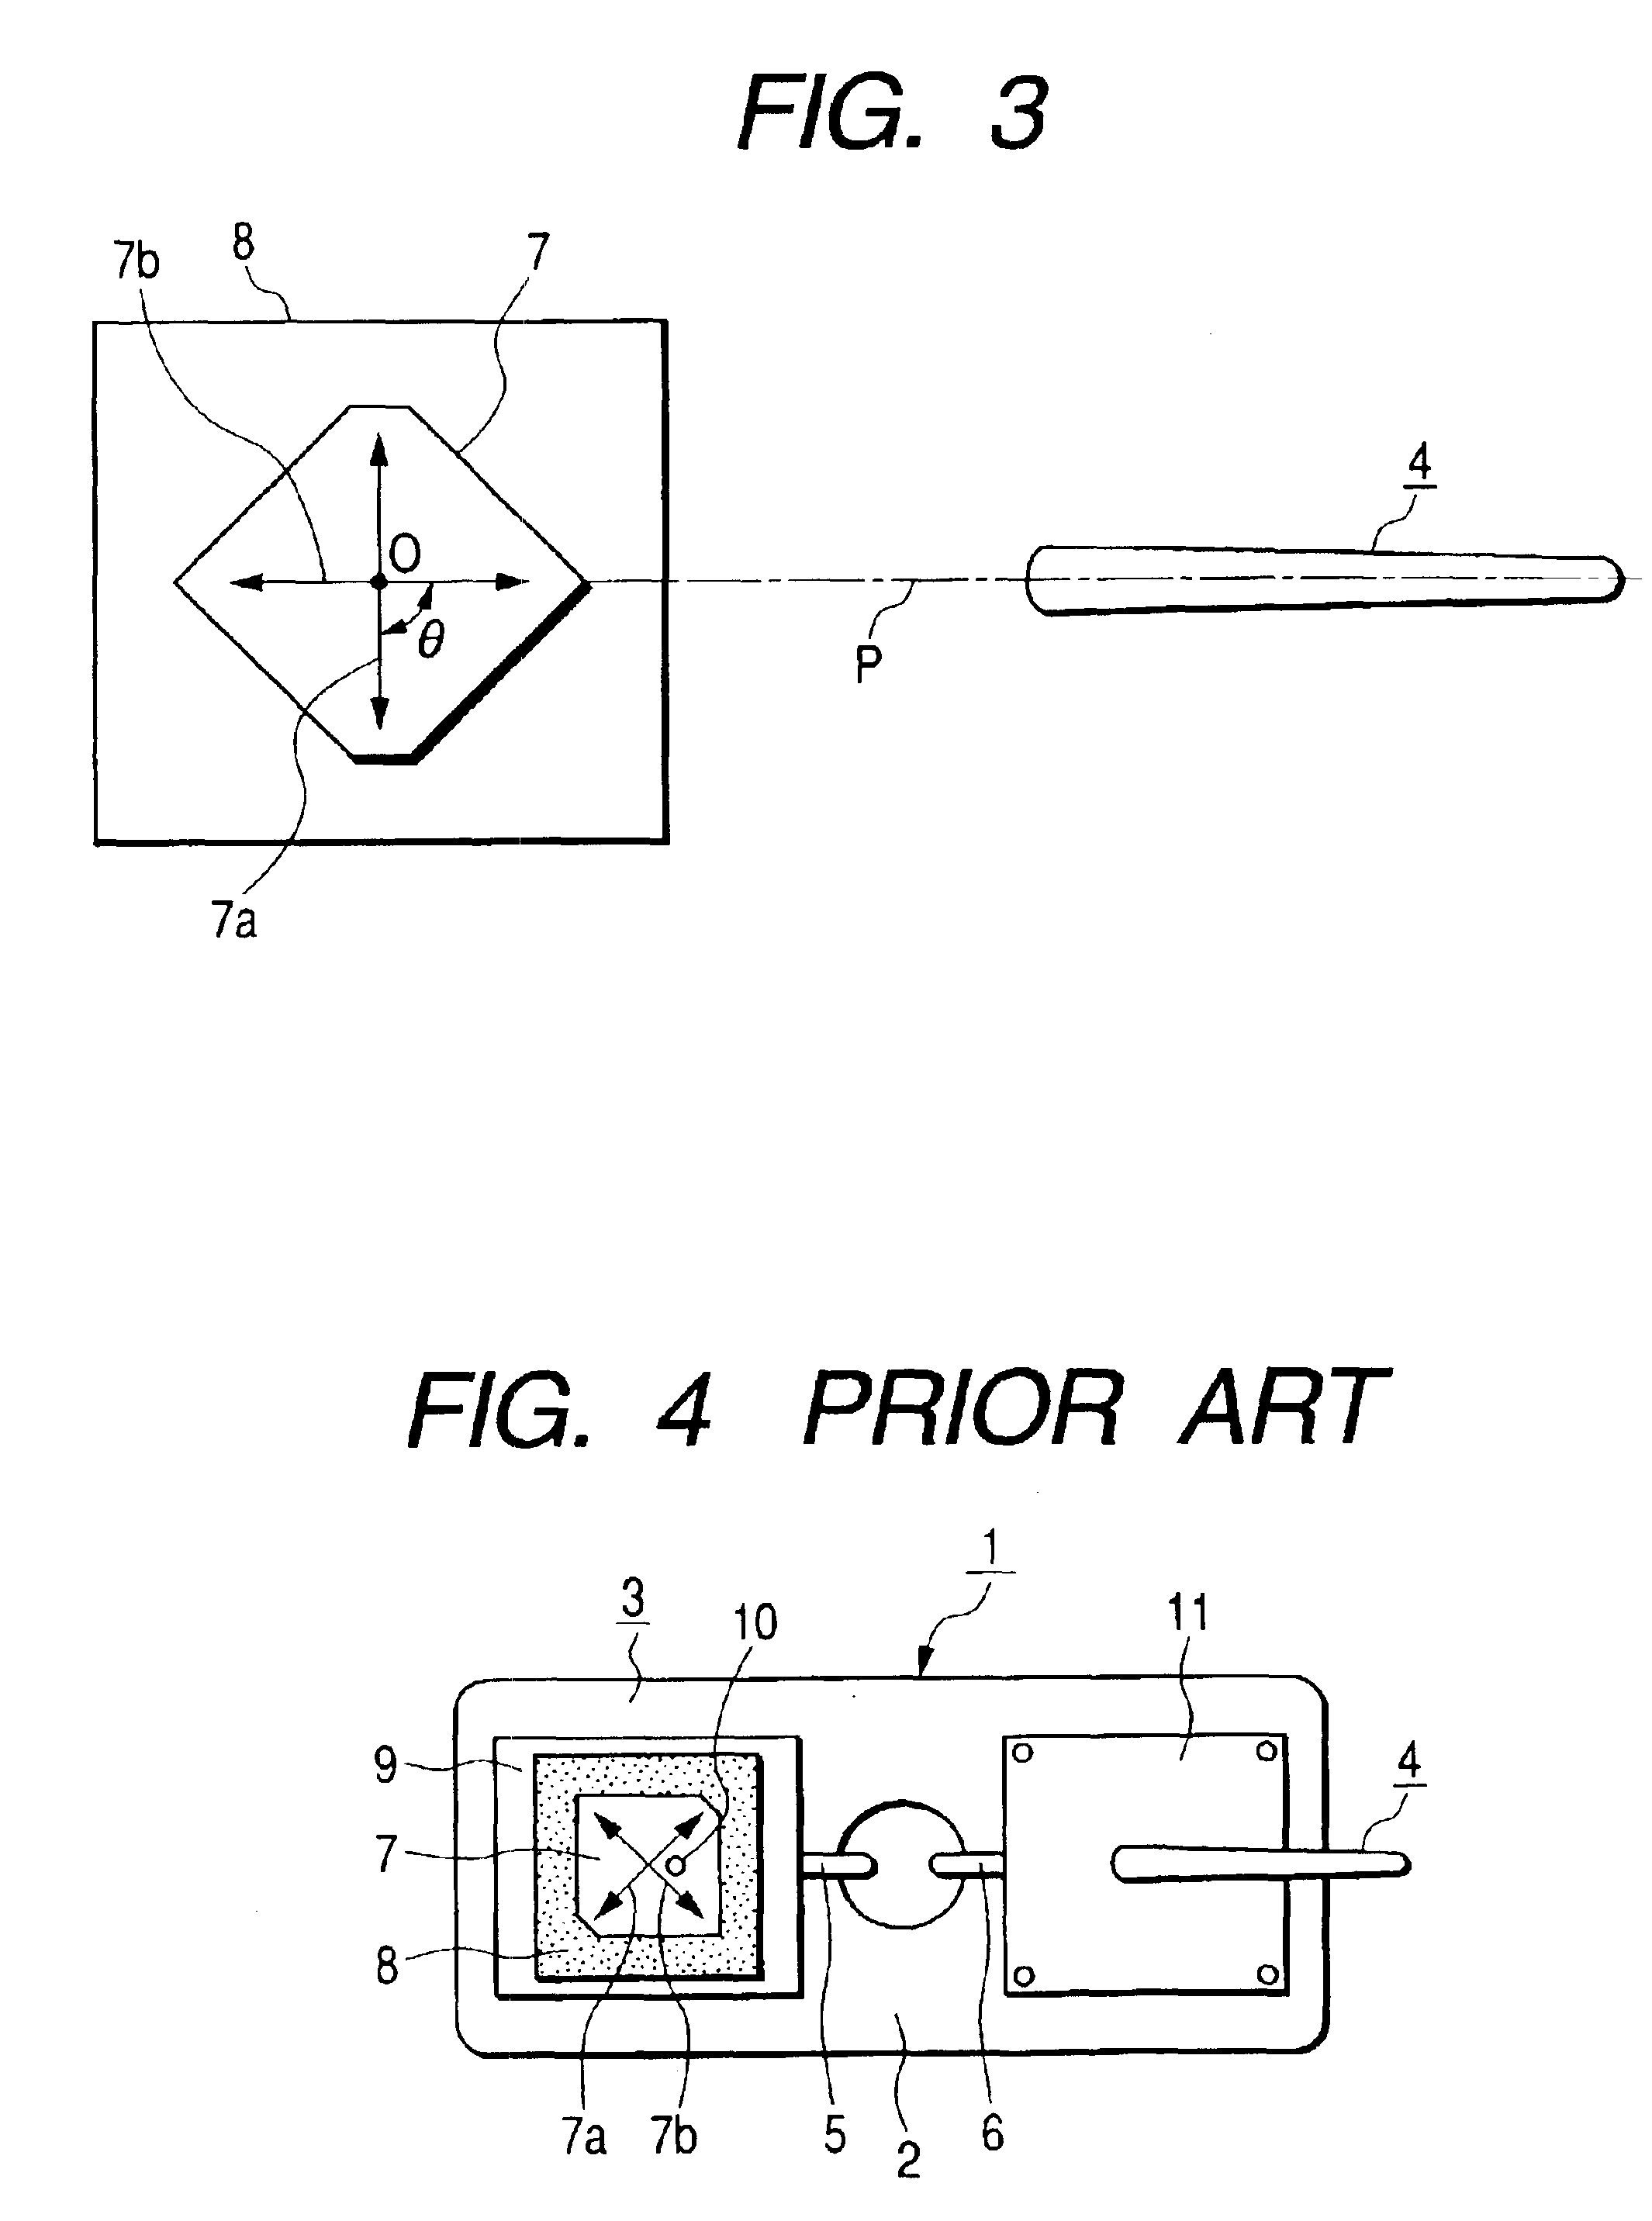 Dual antenna capable of transmitting and receiving circularly polarized electromagnetic wave and linearly polarized electromagnetic wave